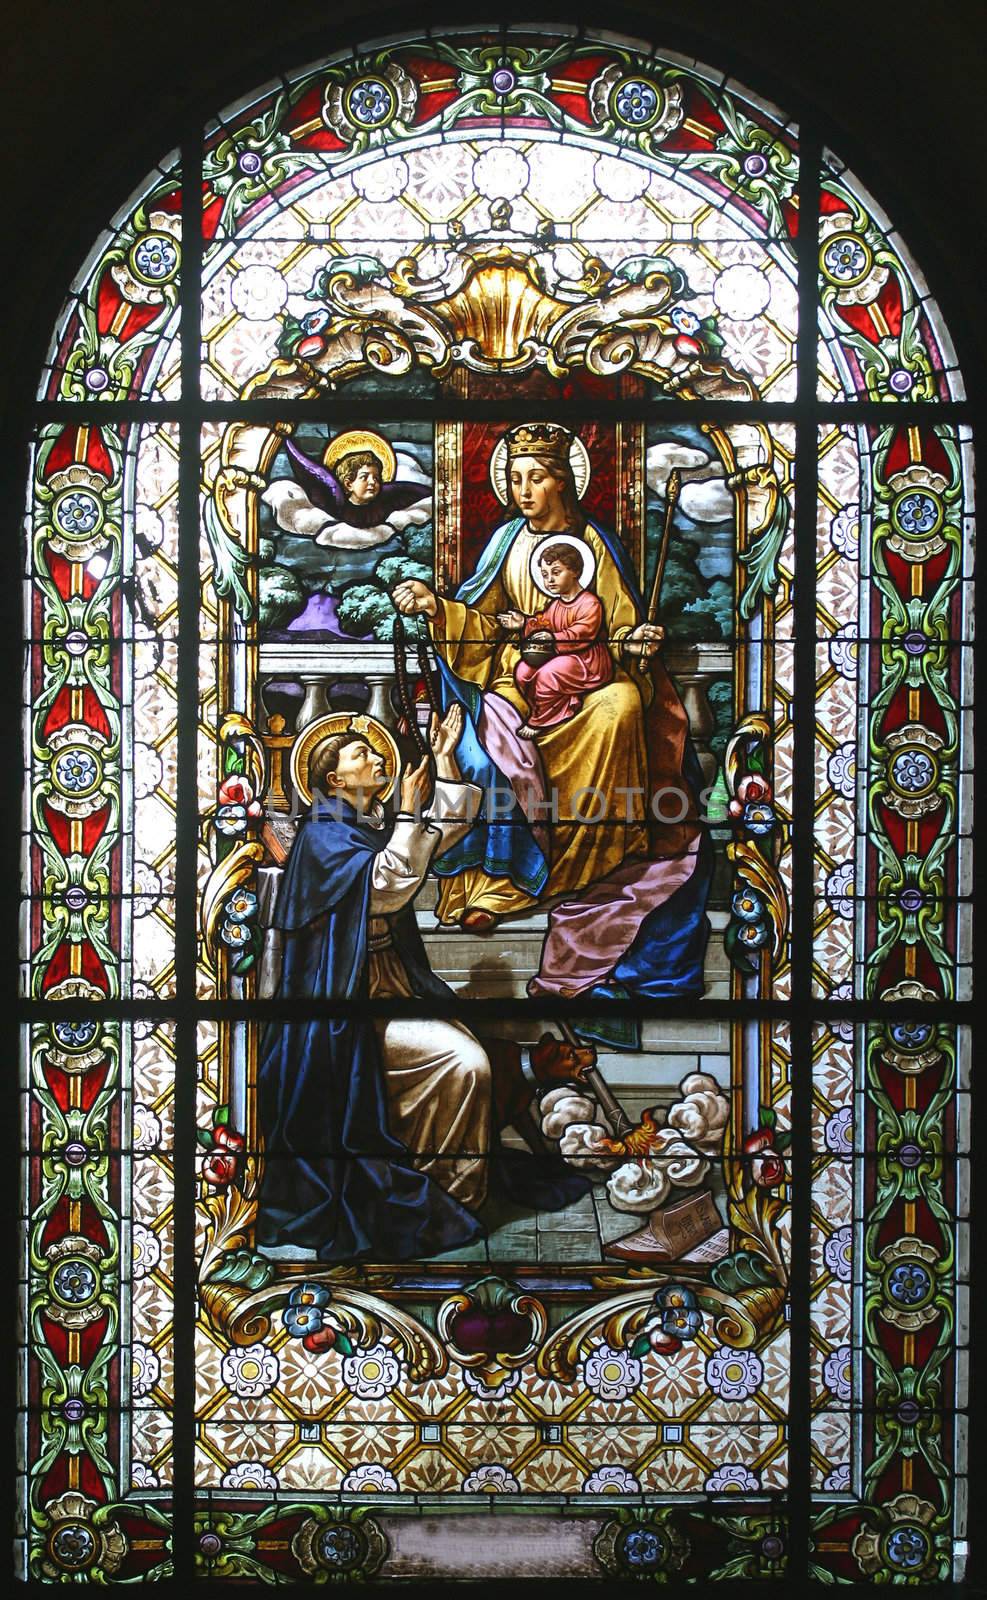 Virgin Mary, stained glass